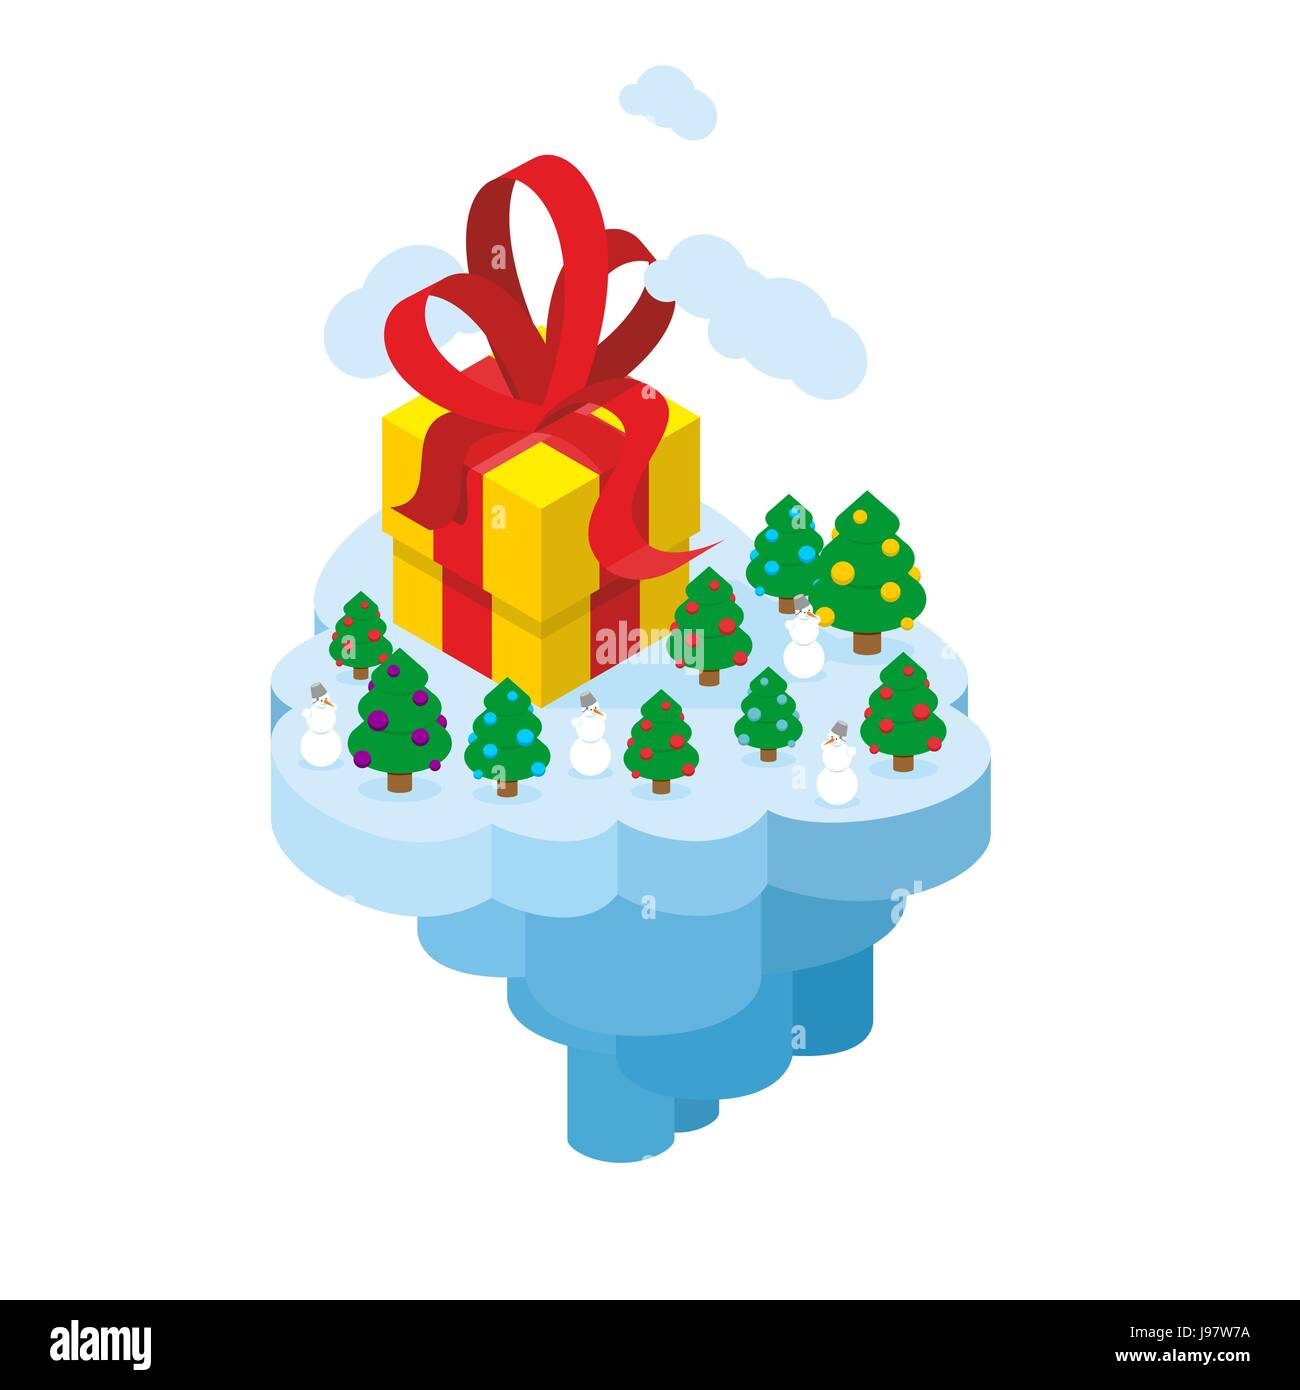 Flying Christmas Island. Gift and Christmas tree for fantastic earth. Part of land flies in  air. Snowman and big box gift. New year illustration. Stock Vector